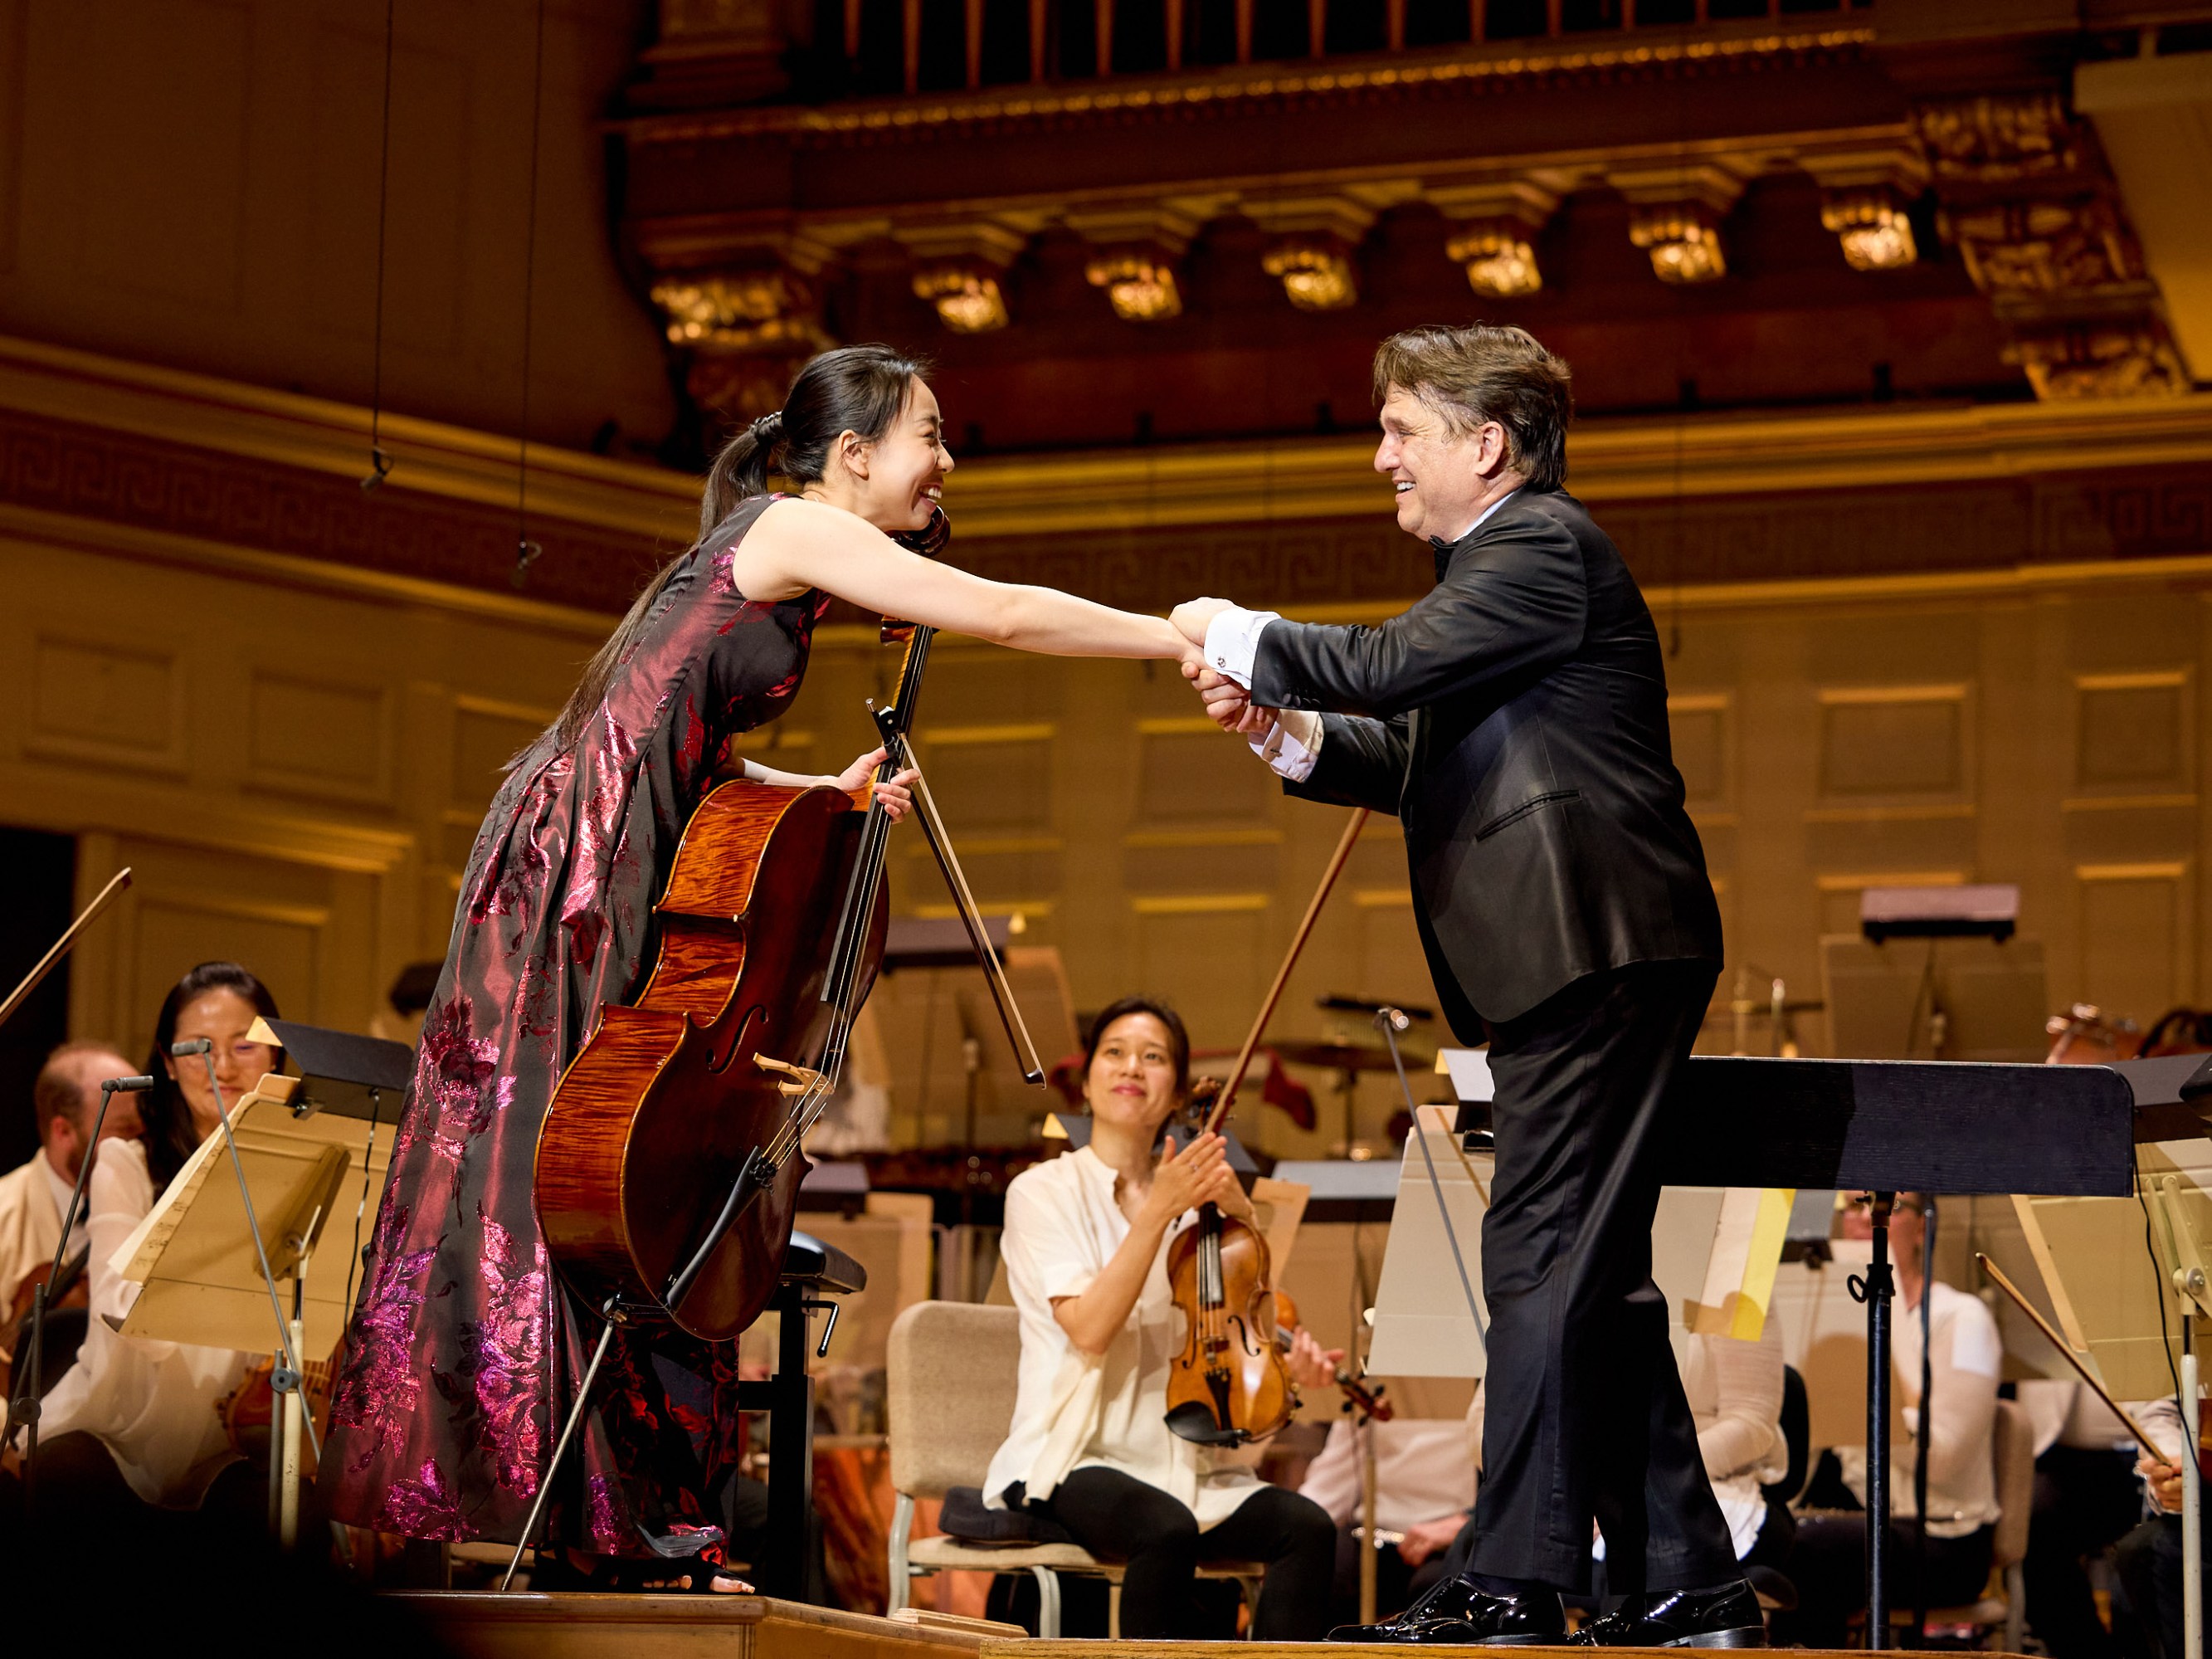 Valerie Chen reaches out to take the hand of the conductor on stage